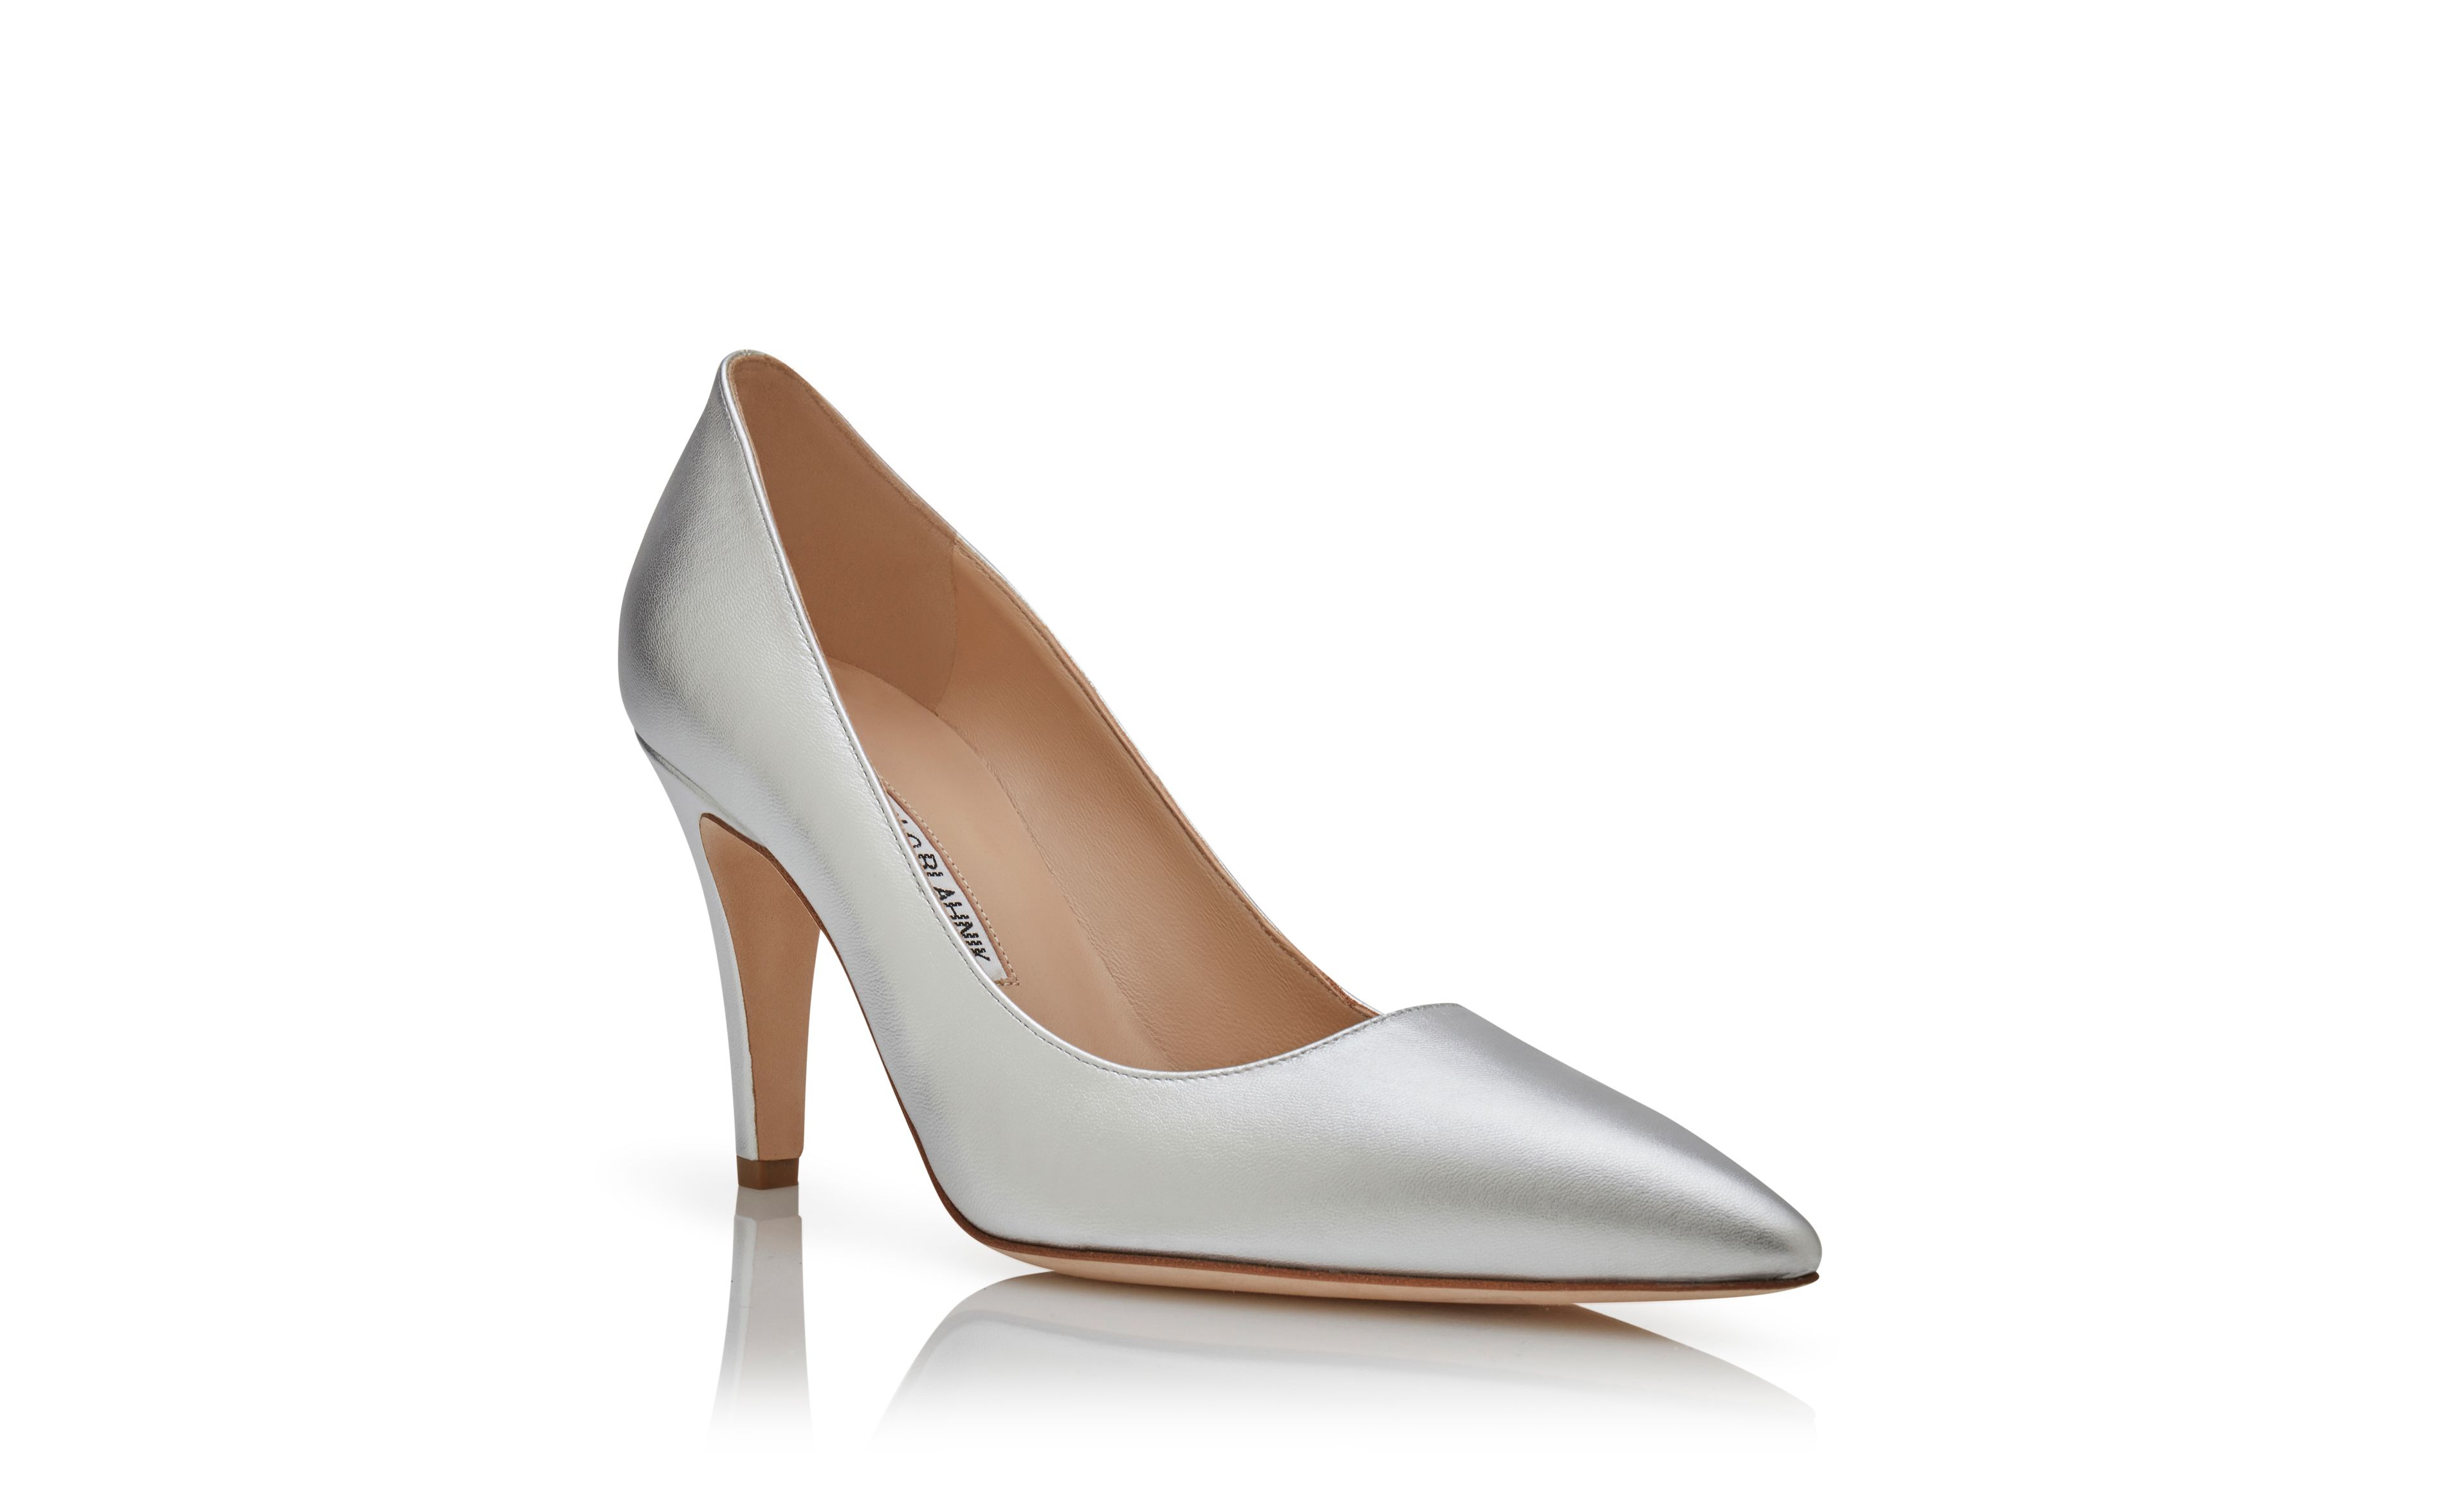 Designer Silver Nappa Leather Pumps - Image Upsell